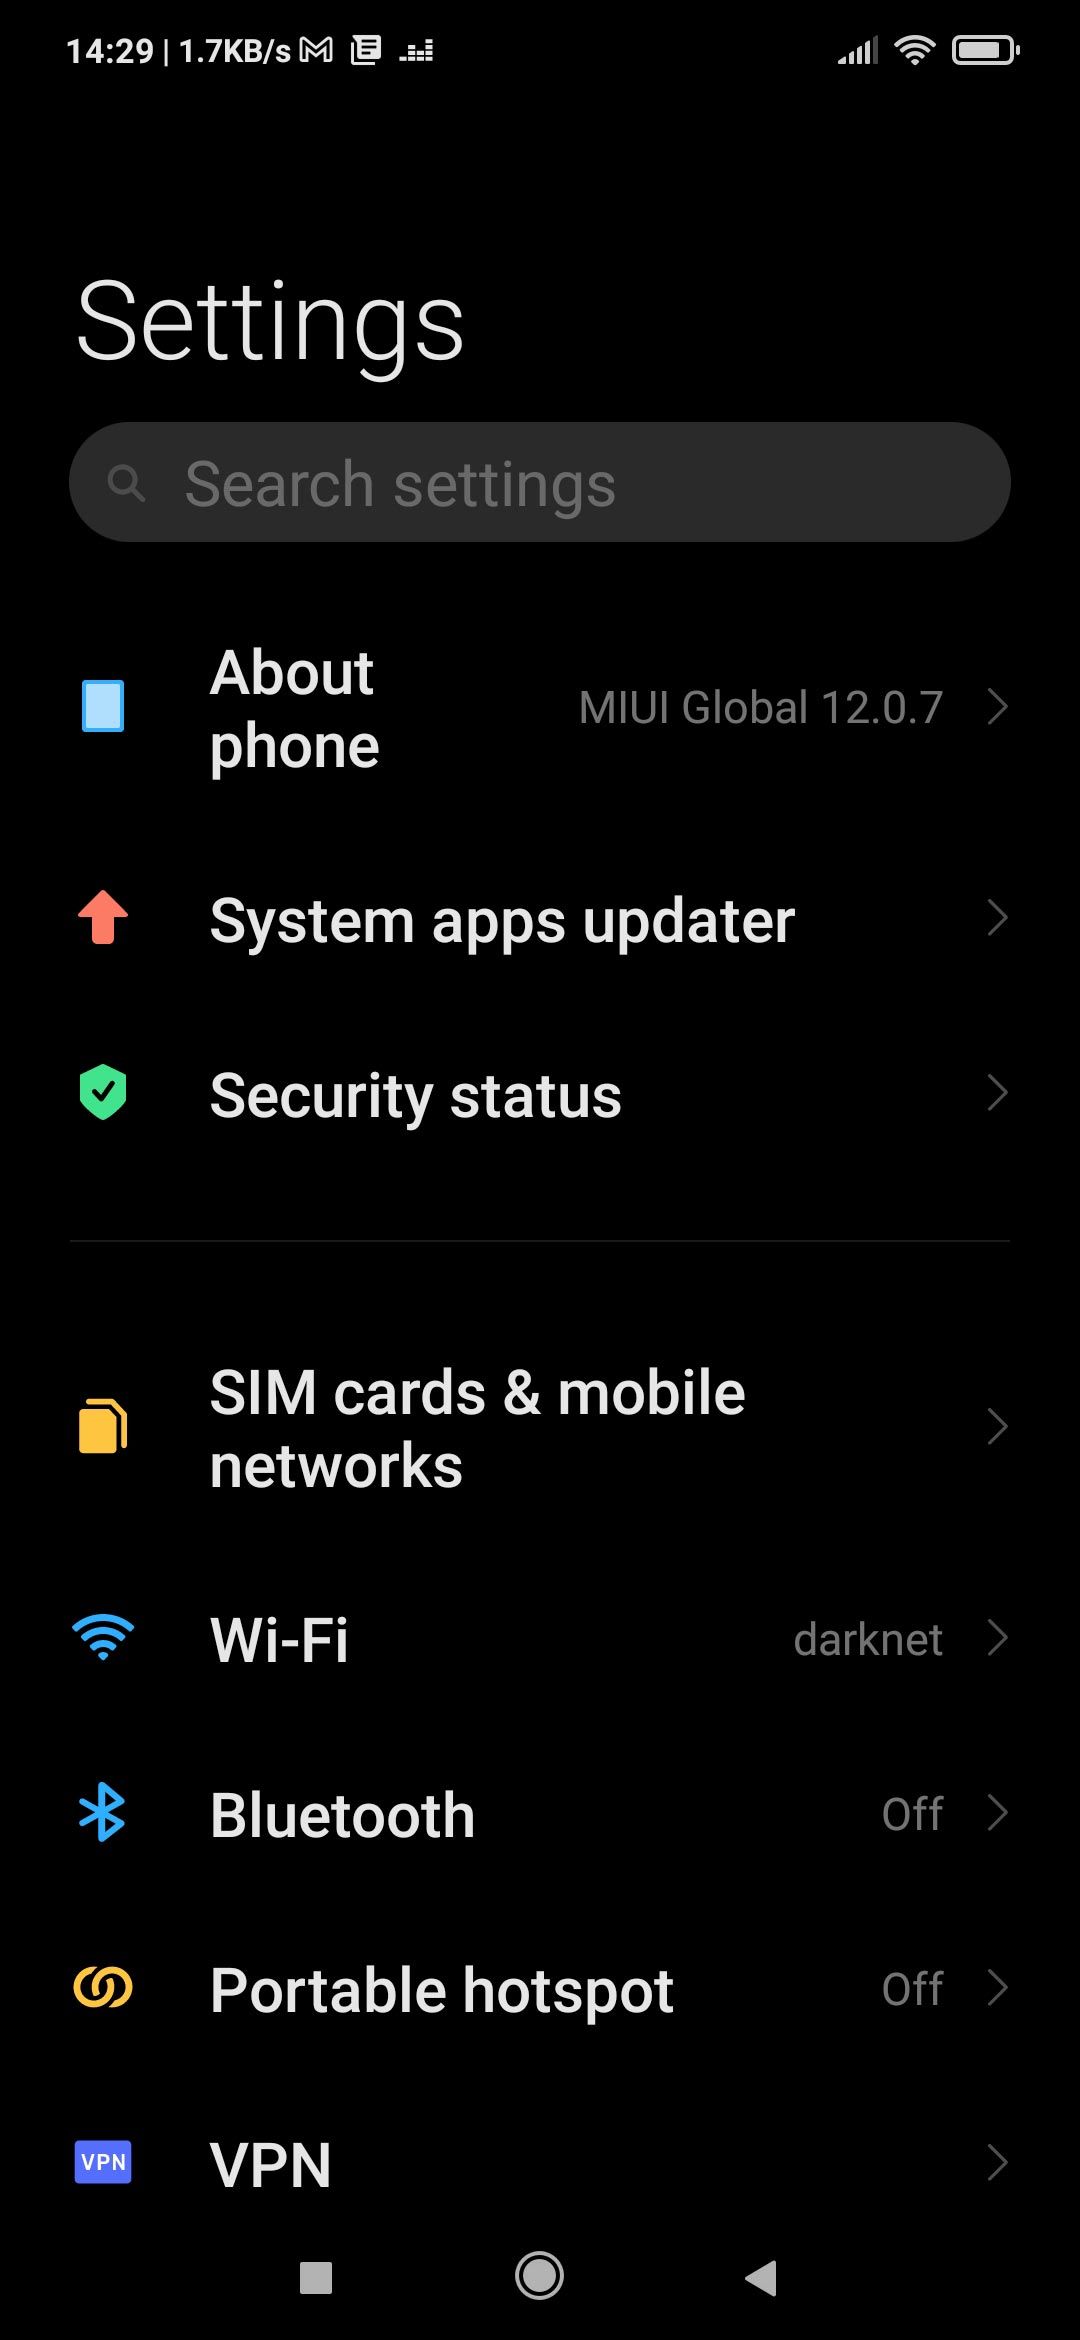 Android (with MIUI) Settings screen